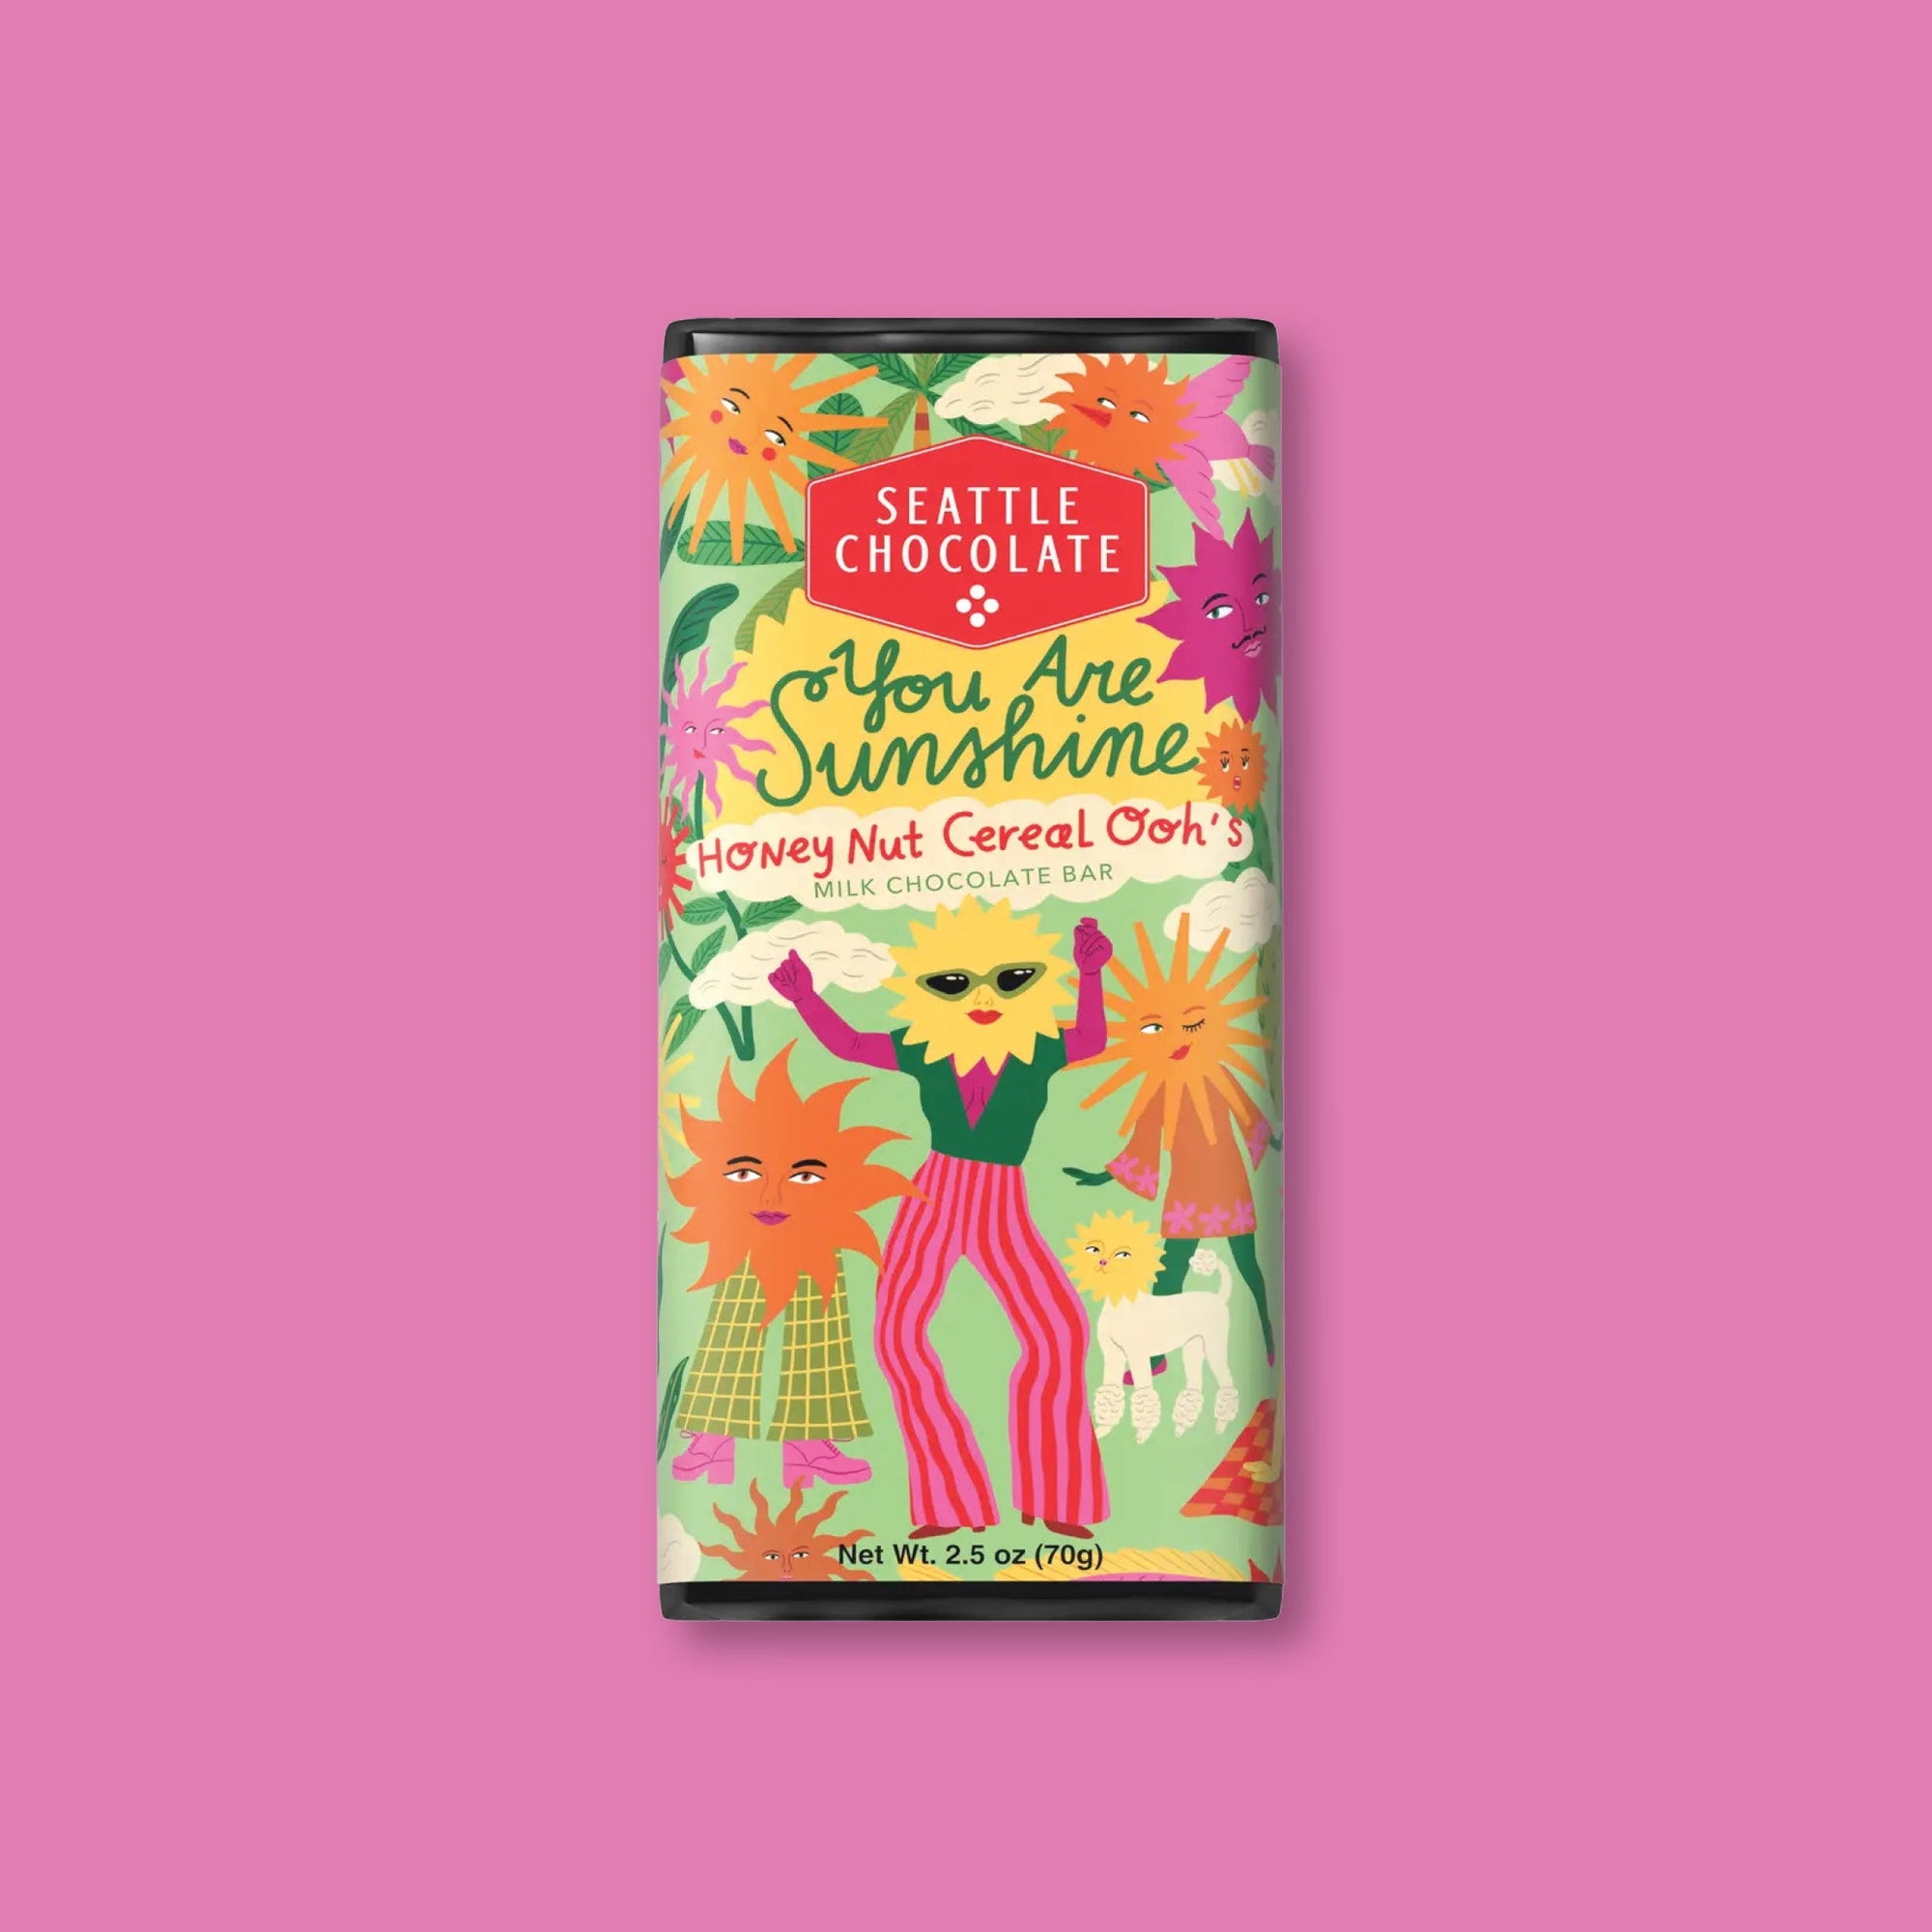 On a raspberry pink background sits a package. This SEATTLE CHOCOLATE has a colorful label and has illustrations of different colored suns with full bodies dancing. It says "You Are Sunshine", "Honey Nut Cereal Ooh's" in handwritten lettering. It is a MILK CHOCOLATE BAR. Net Wt. 2.5 oz (70g)